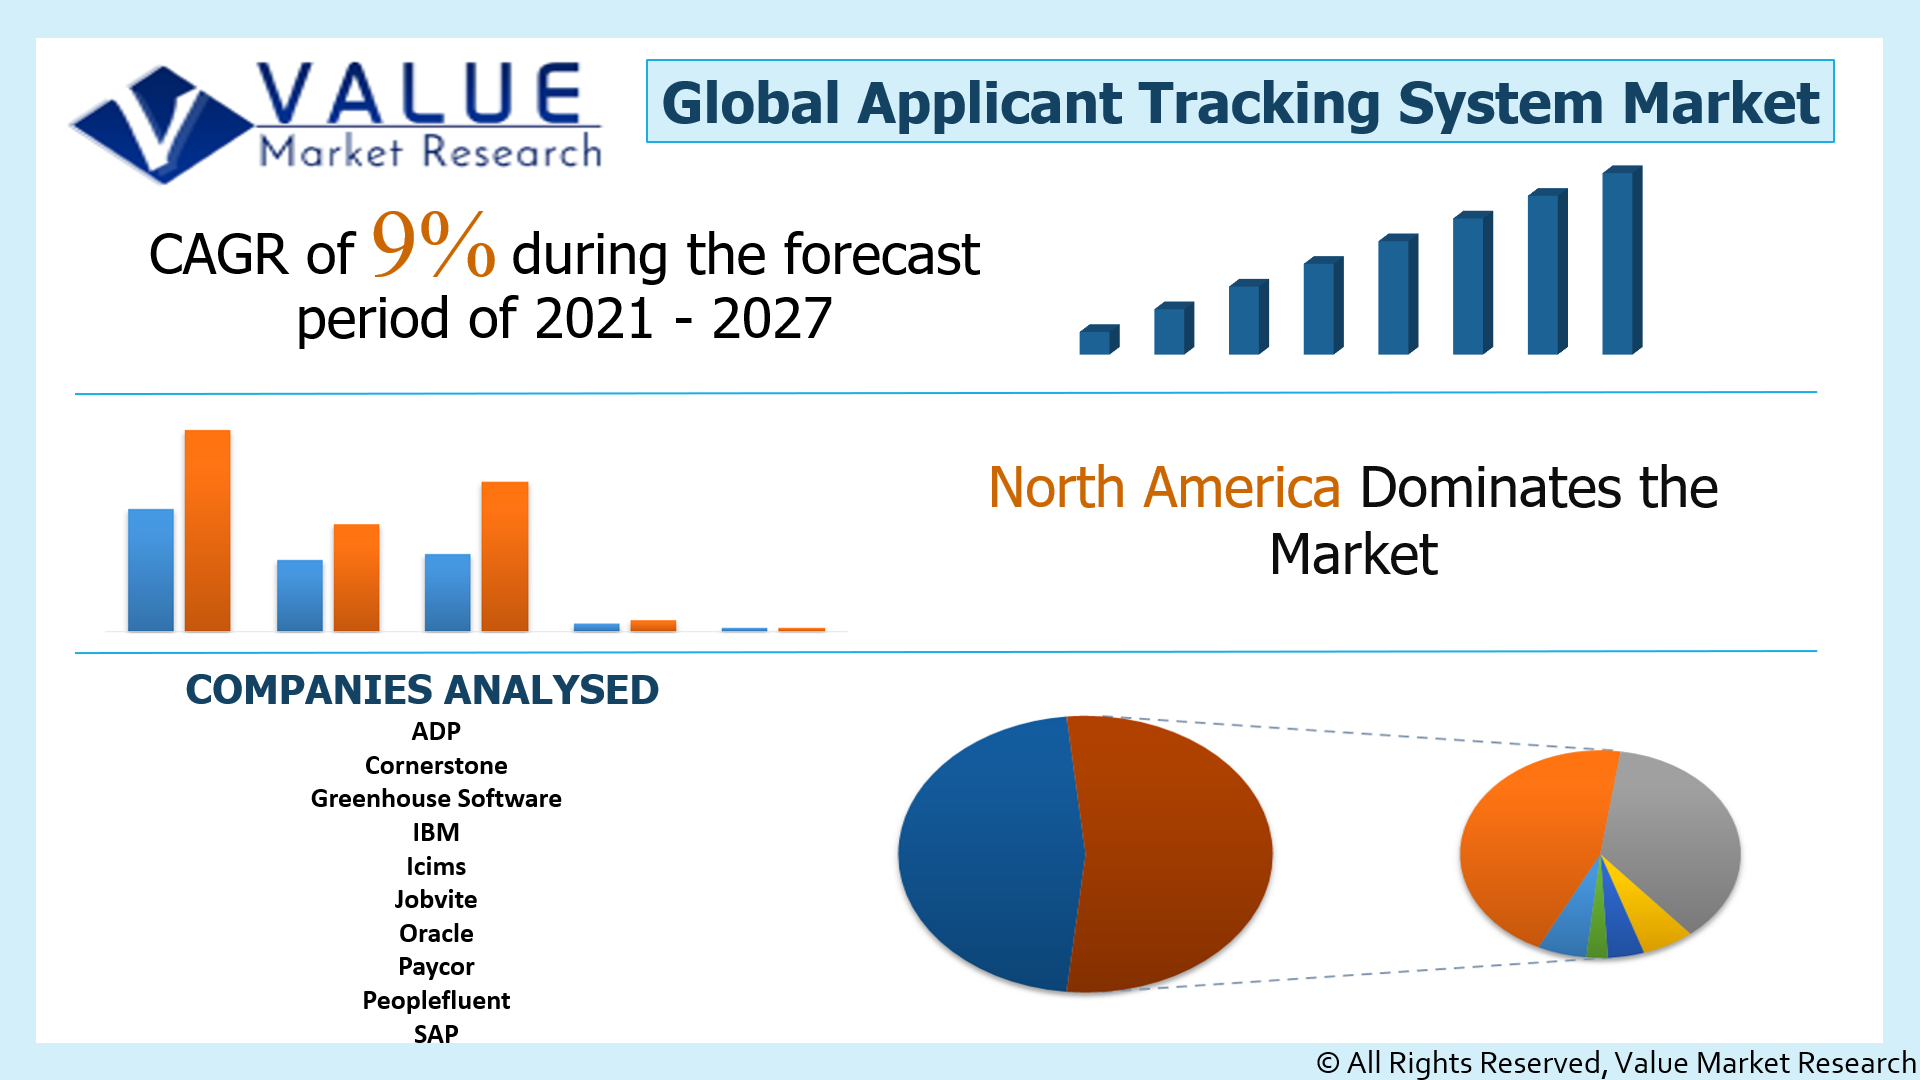 Global Applicant Tracking System Market Share